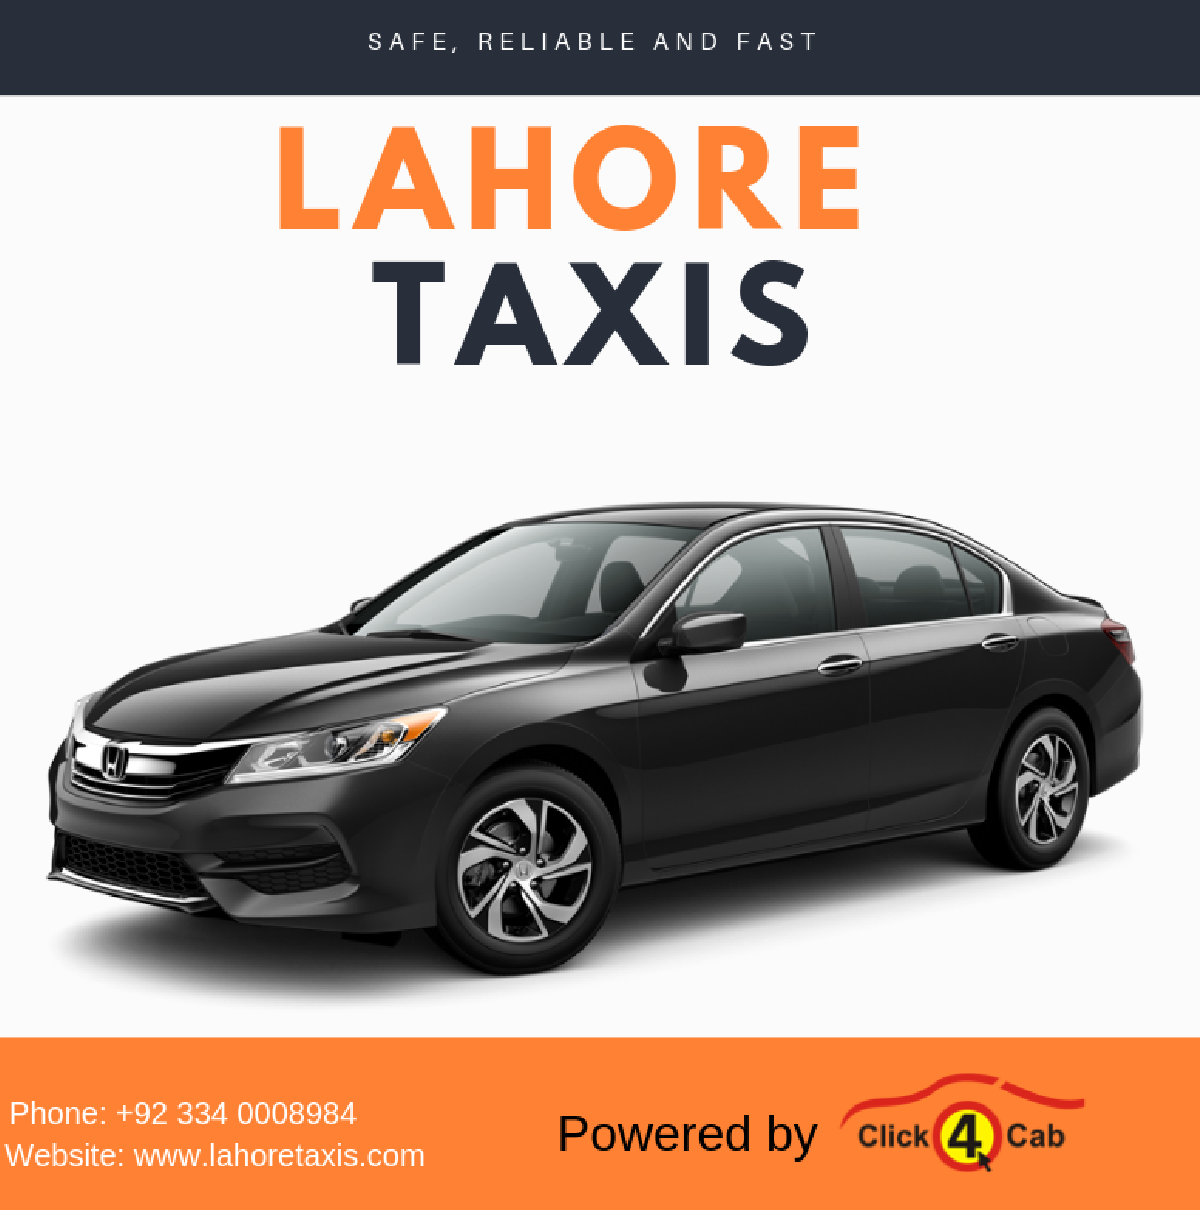 Lahore Taxis